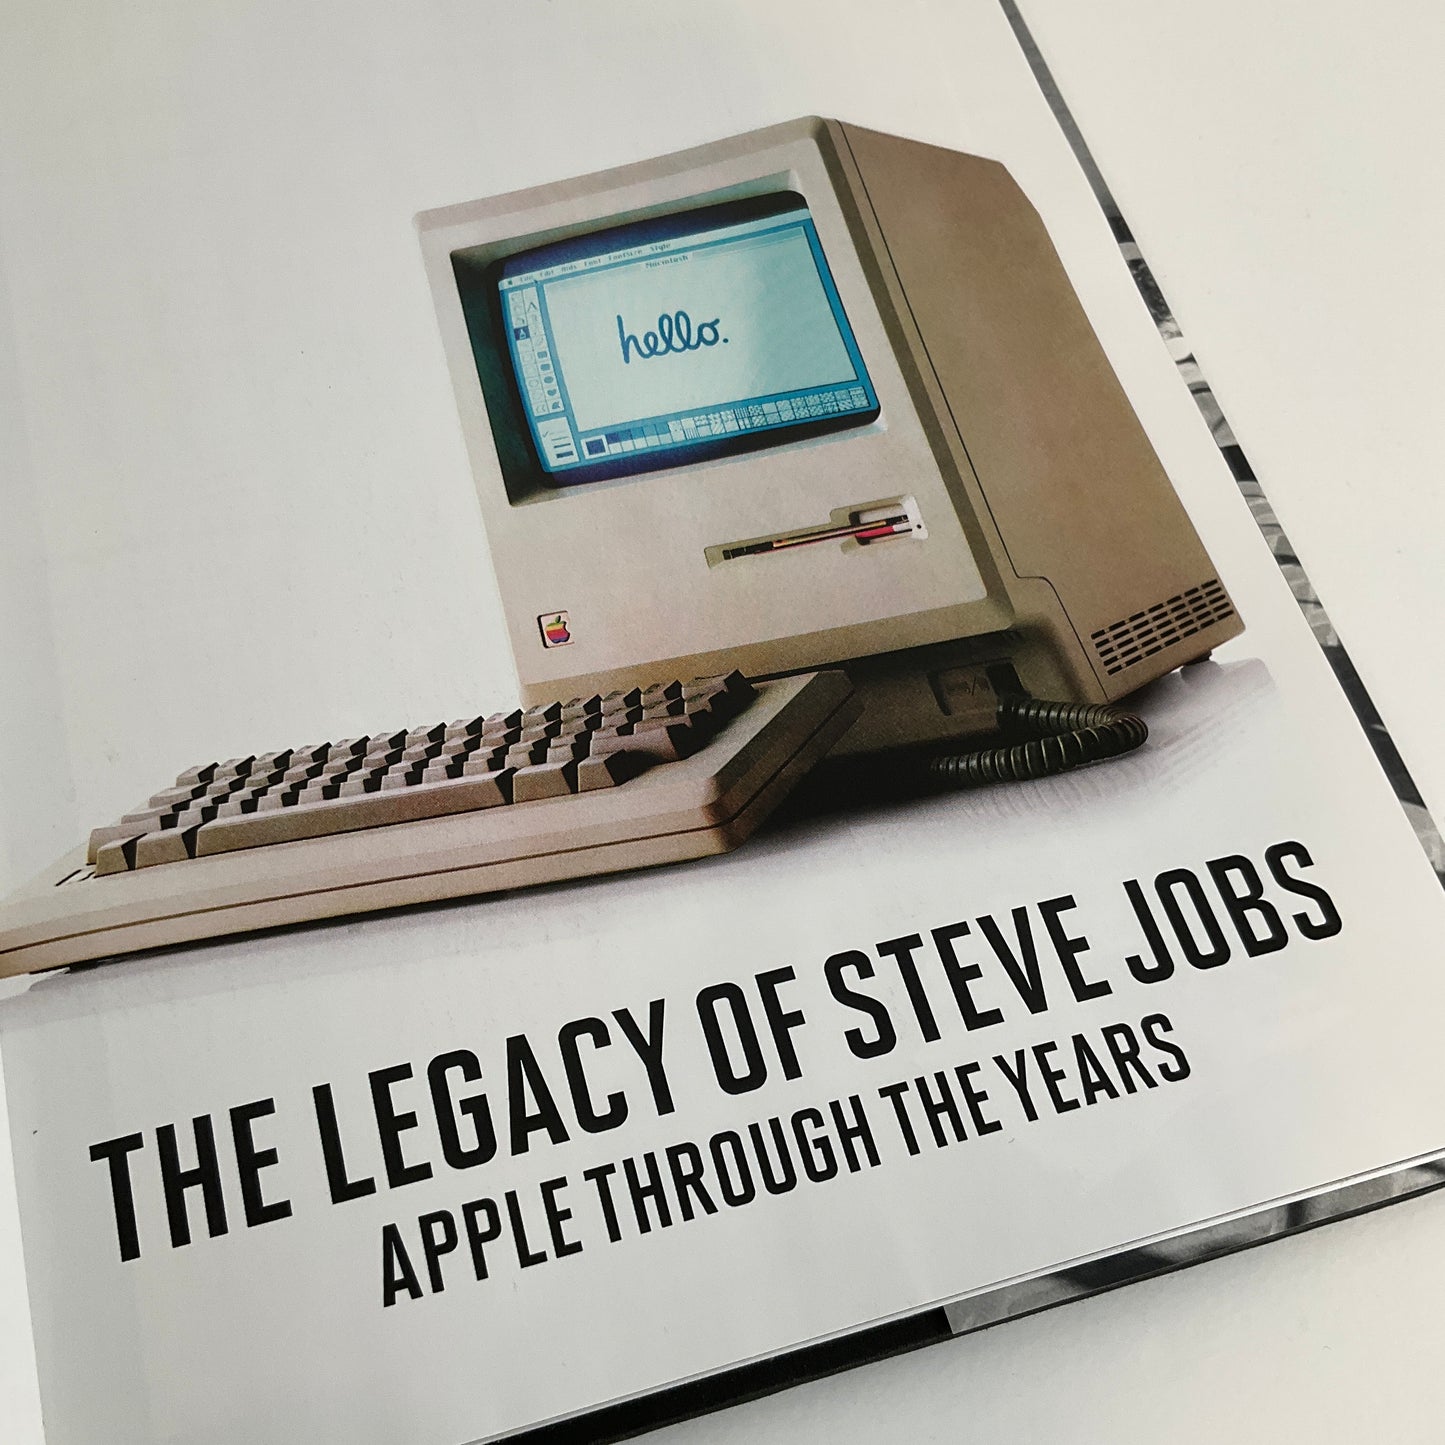 Time - The Legacy of Steve Jobs